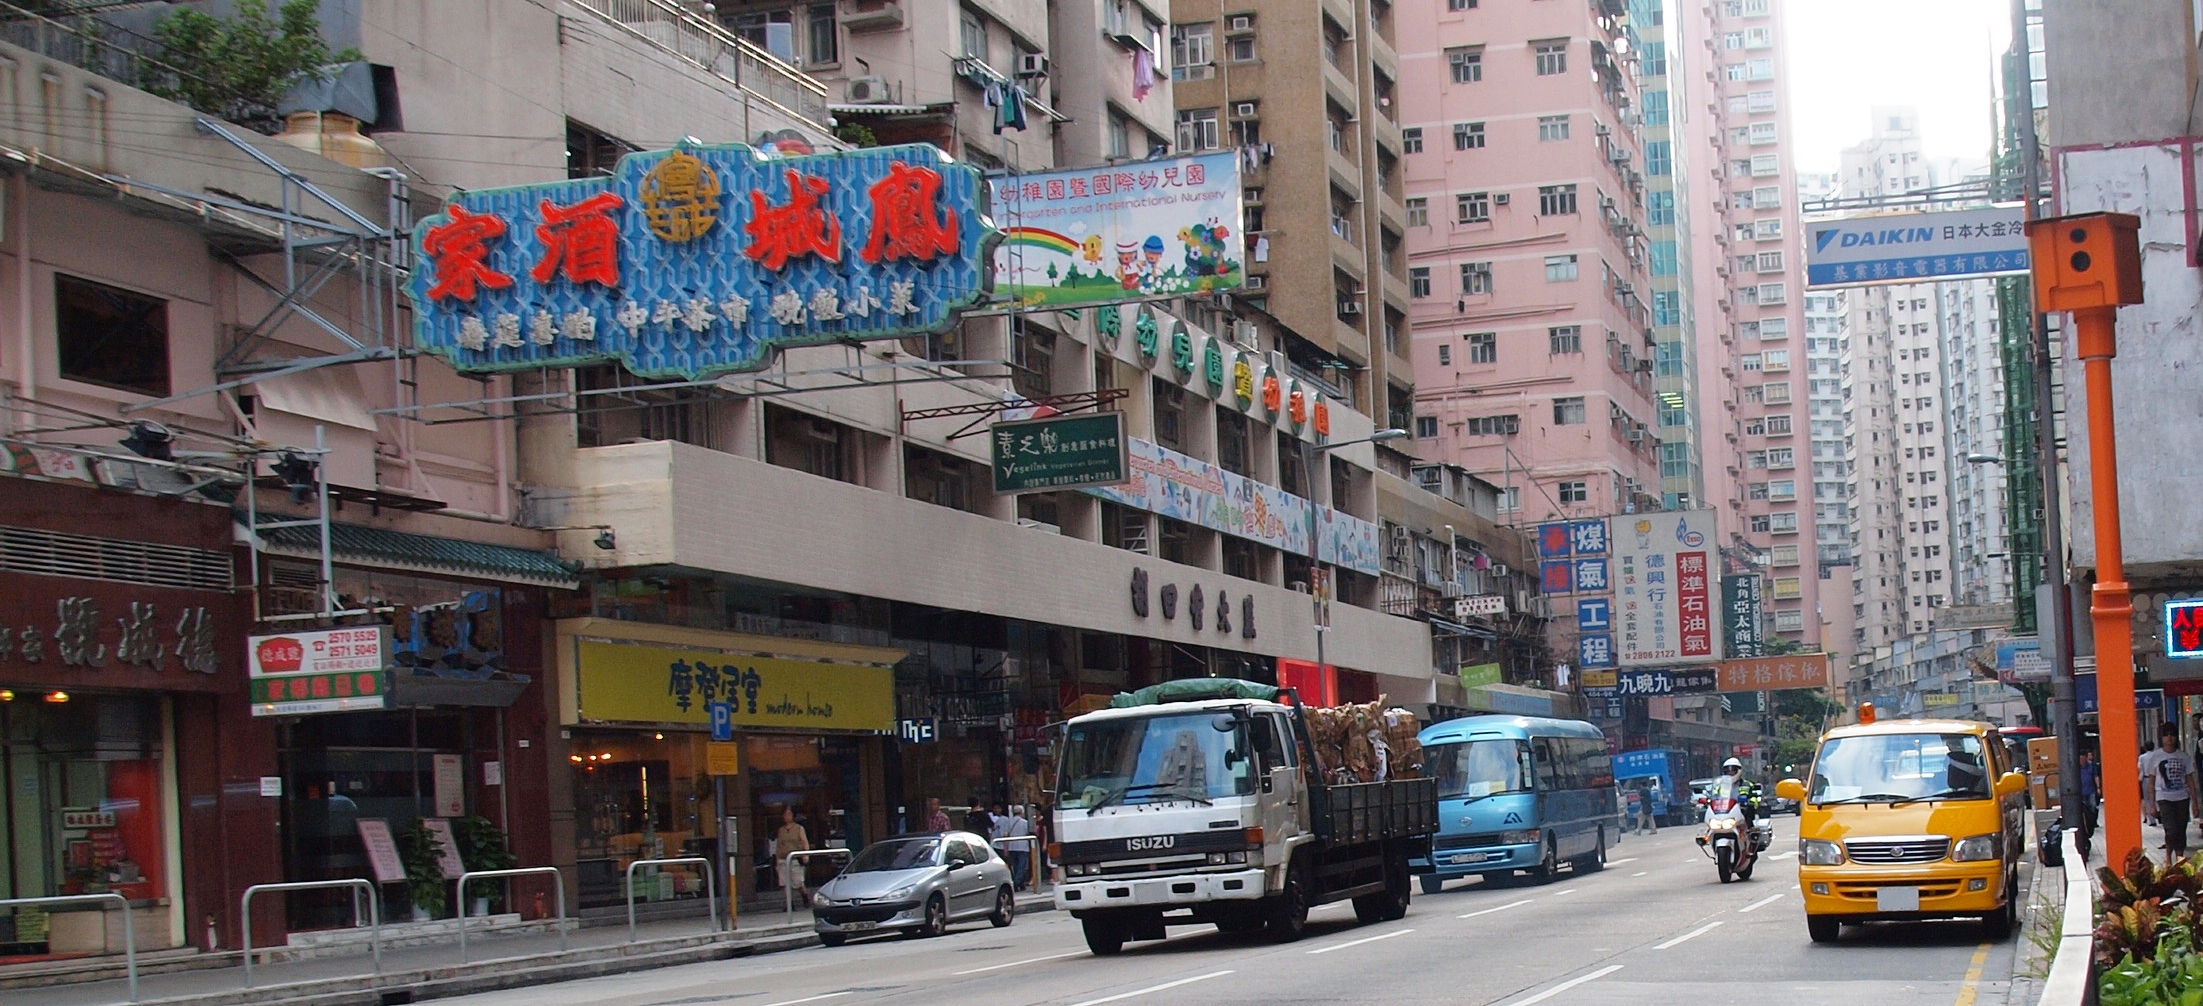 Meeting the intersection safety challenges of Hong Kong